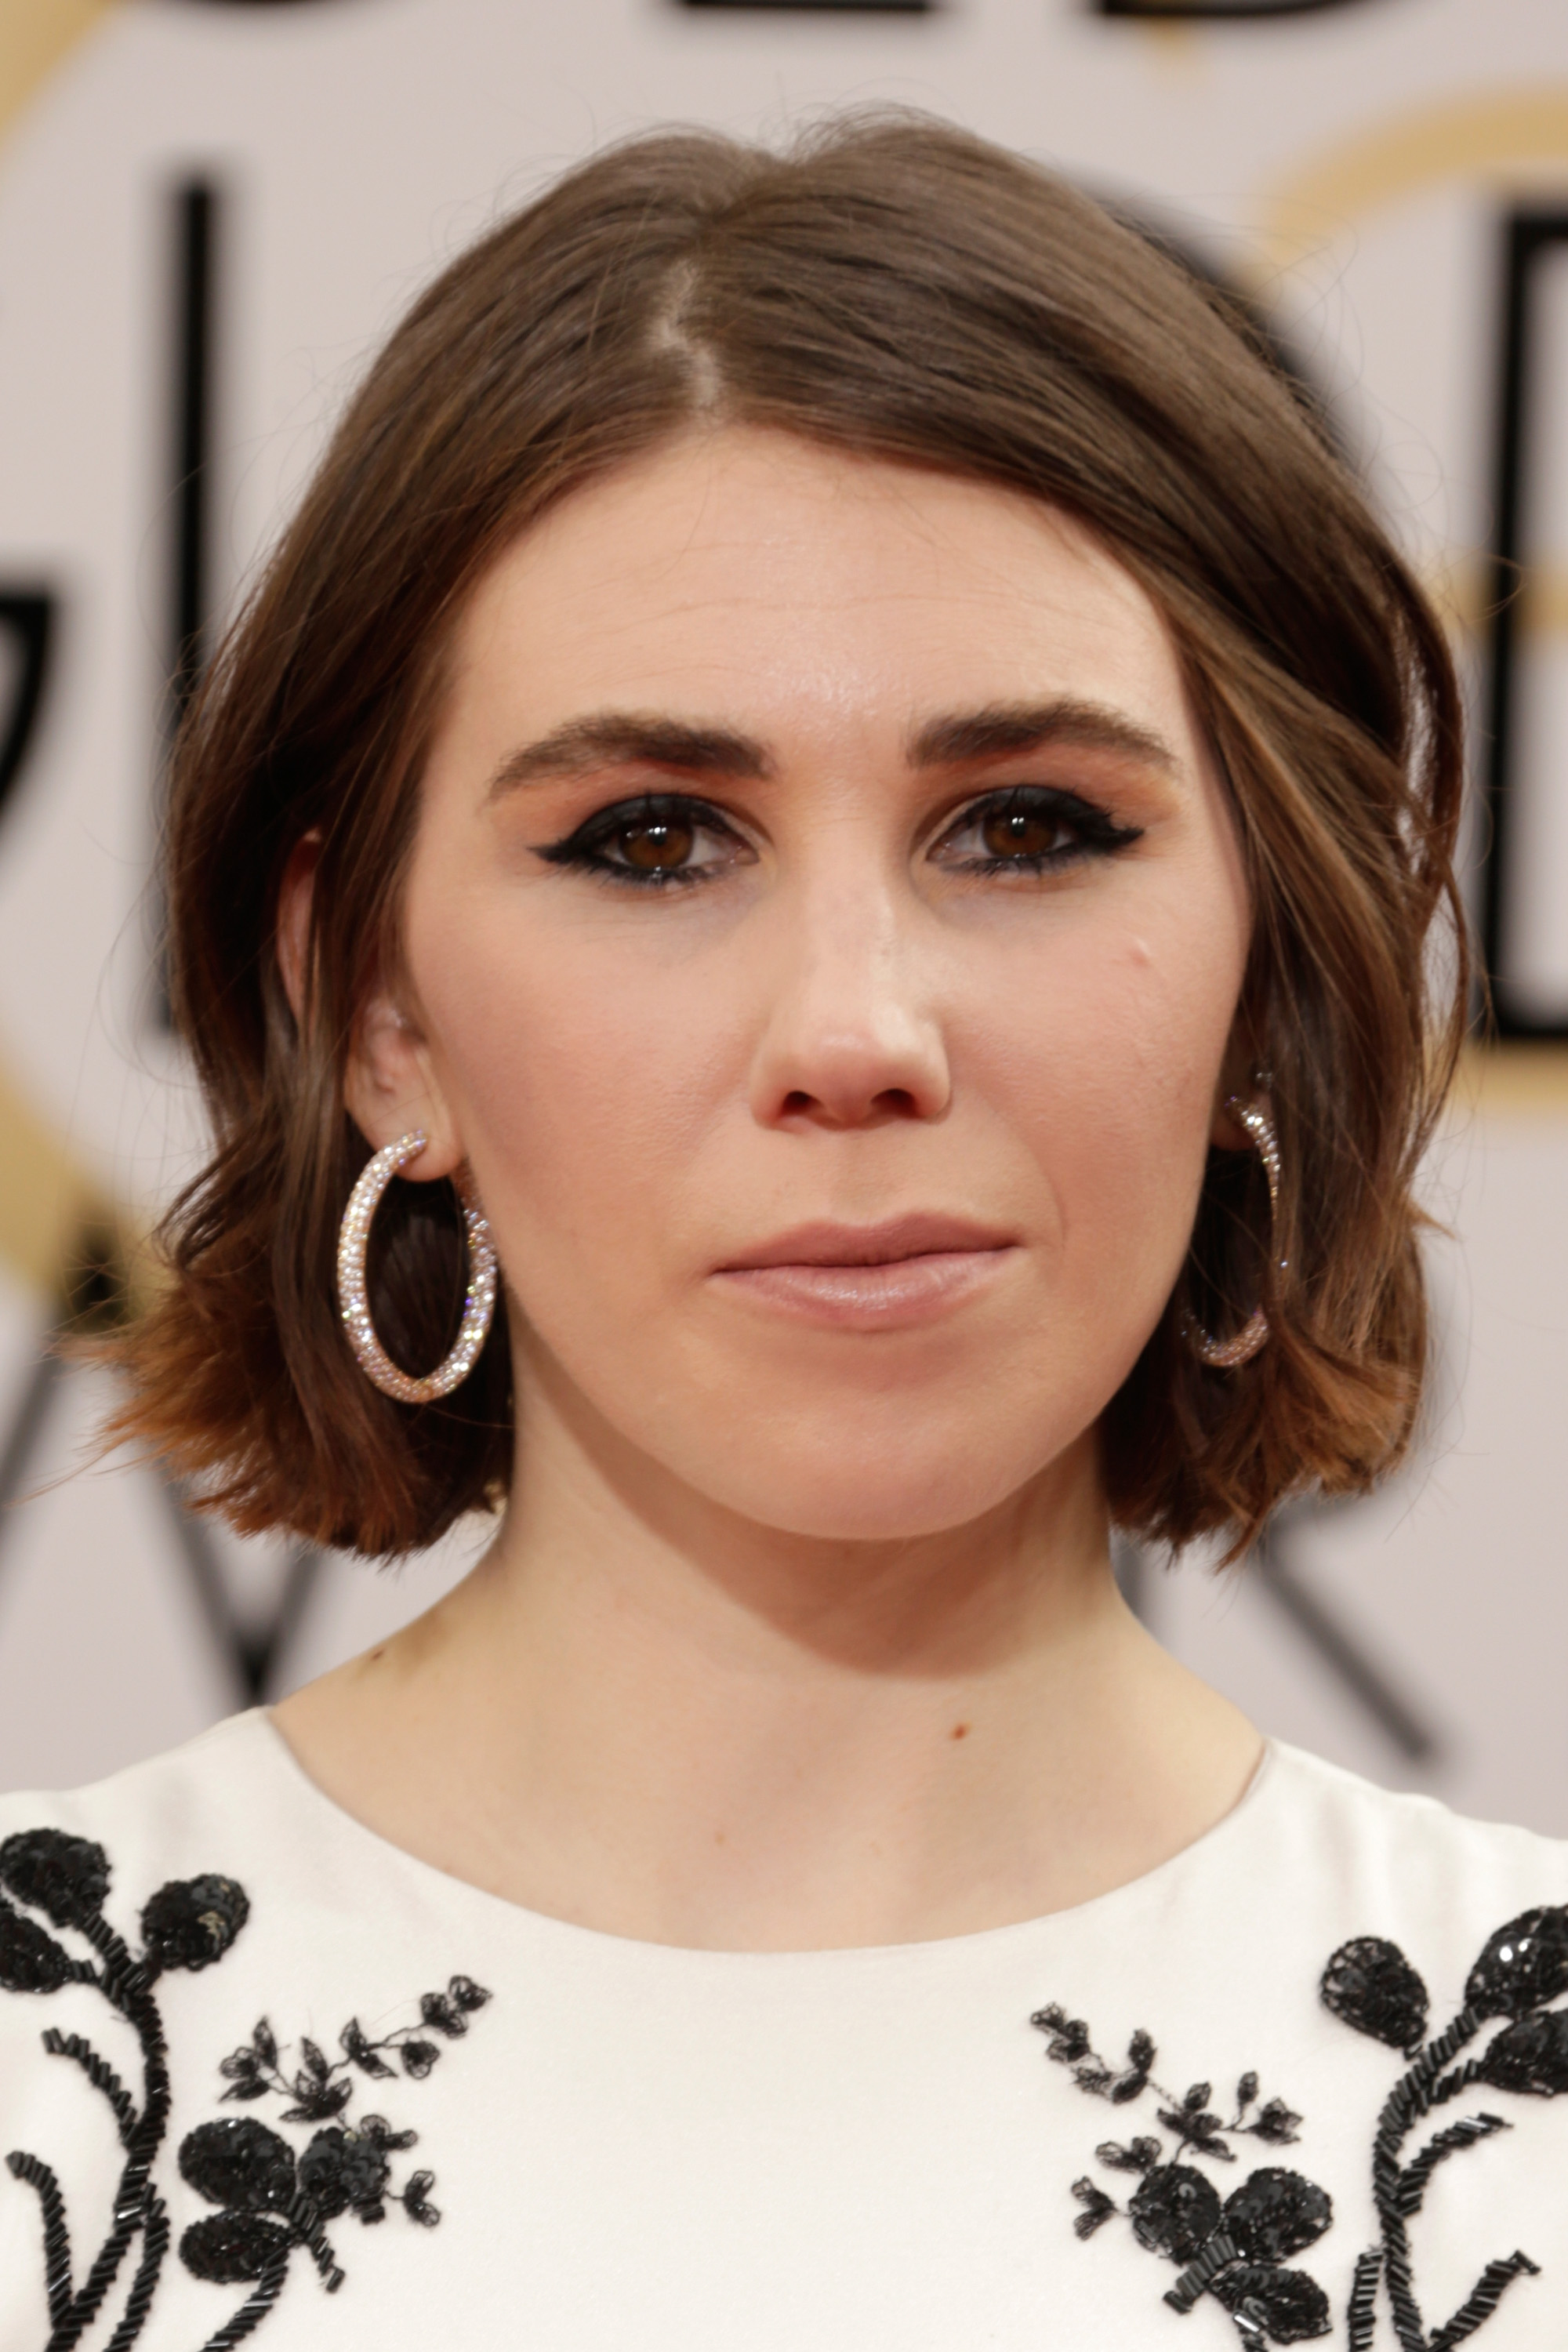 Zosia Mamet attends the 71st Annual Golden Globe Awards on January 12, 2014 in Beverly Hills, California. (Jeff Vespa&mdash;WireImage)